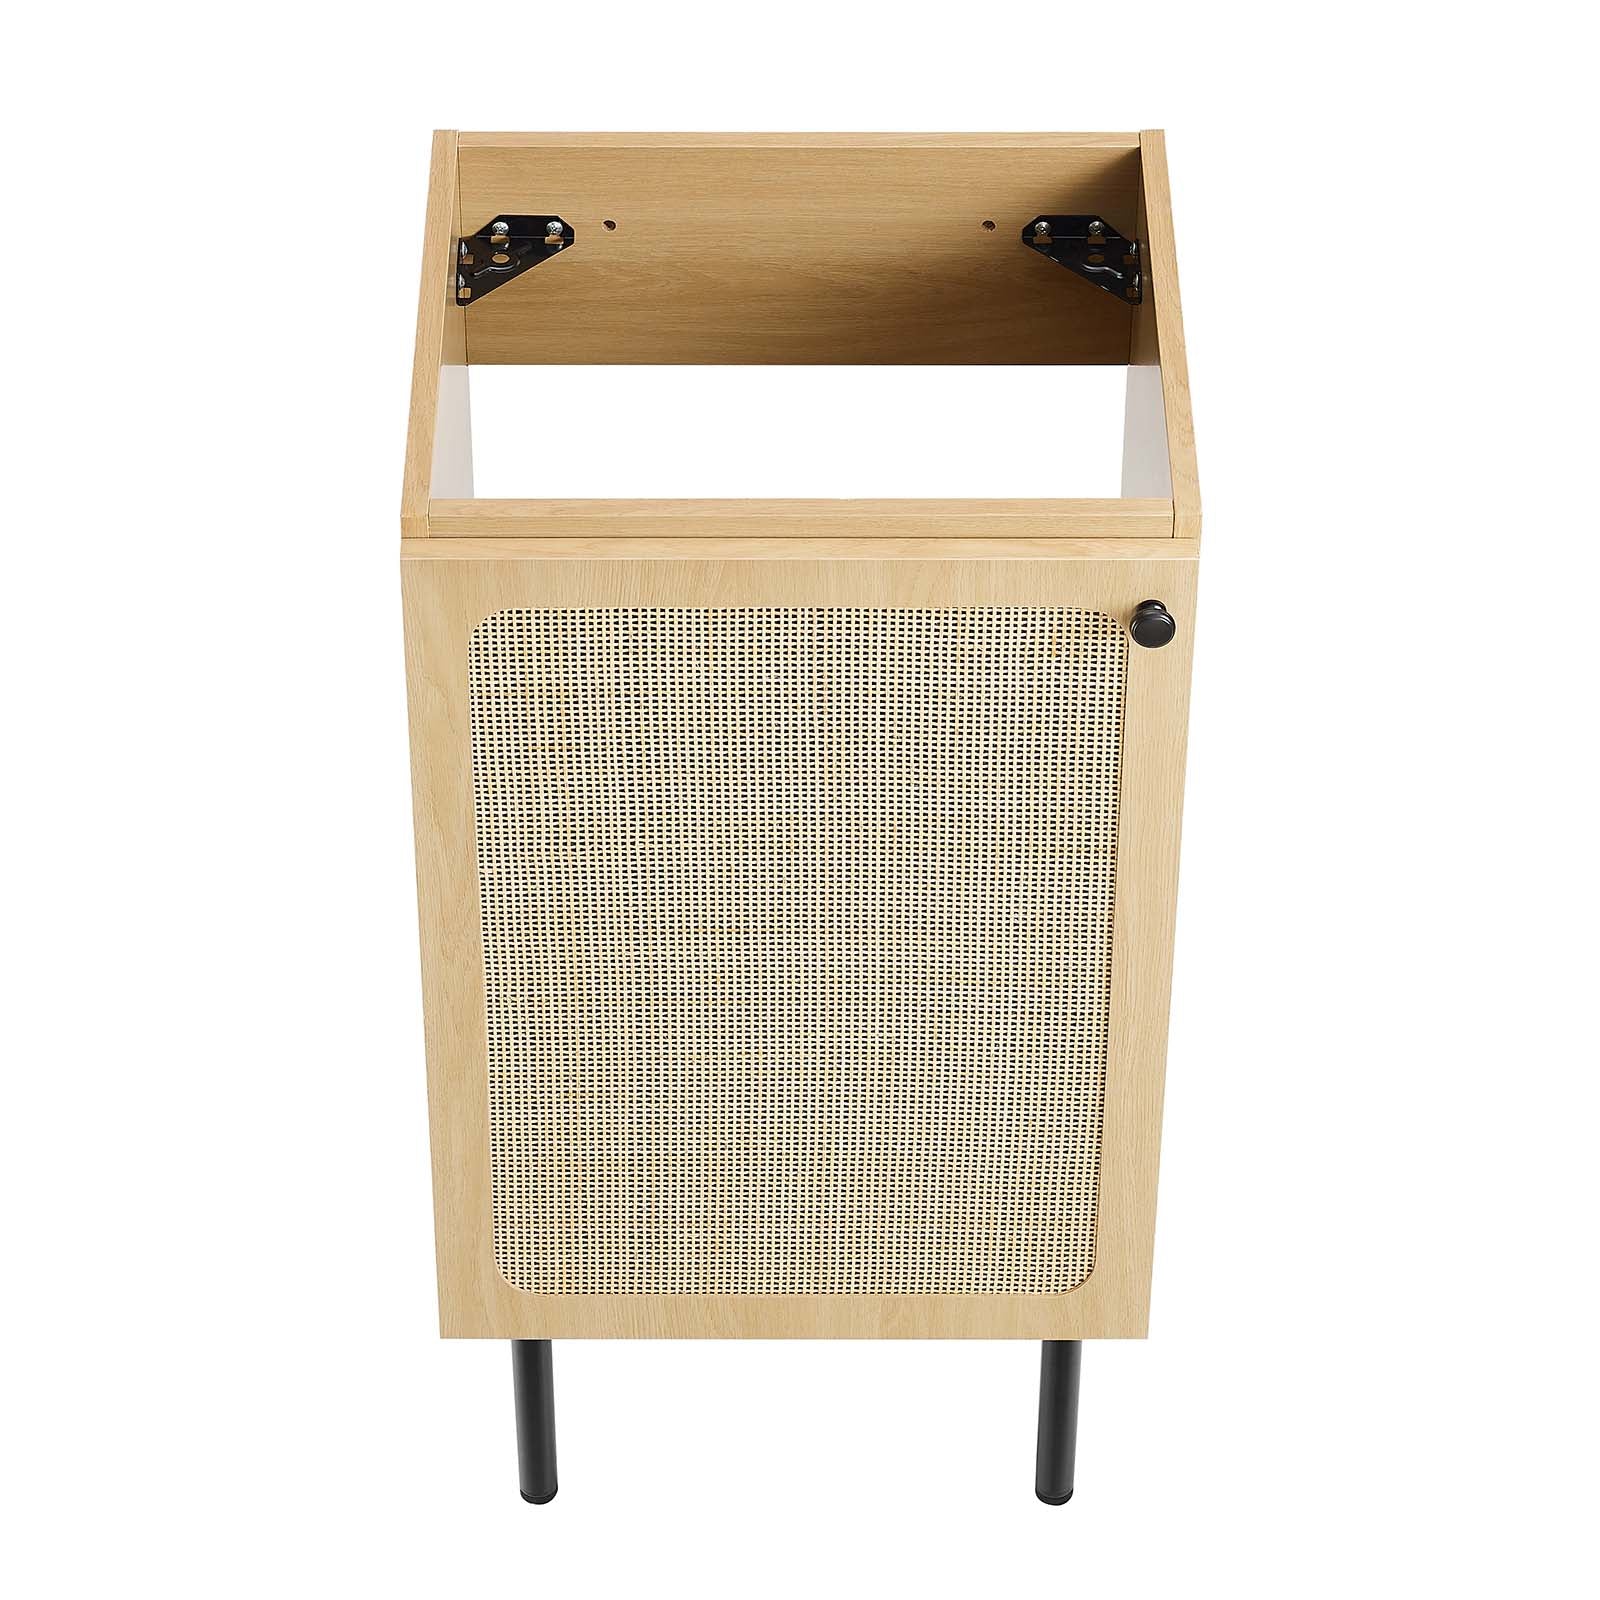 Chaucer 18" Bathroom Vanity Cabinet (Sink Basin Not Included) - East Shore Modern Home Furnishings